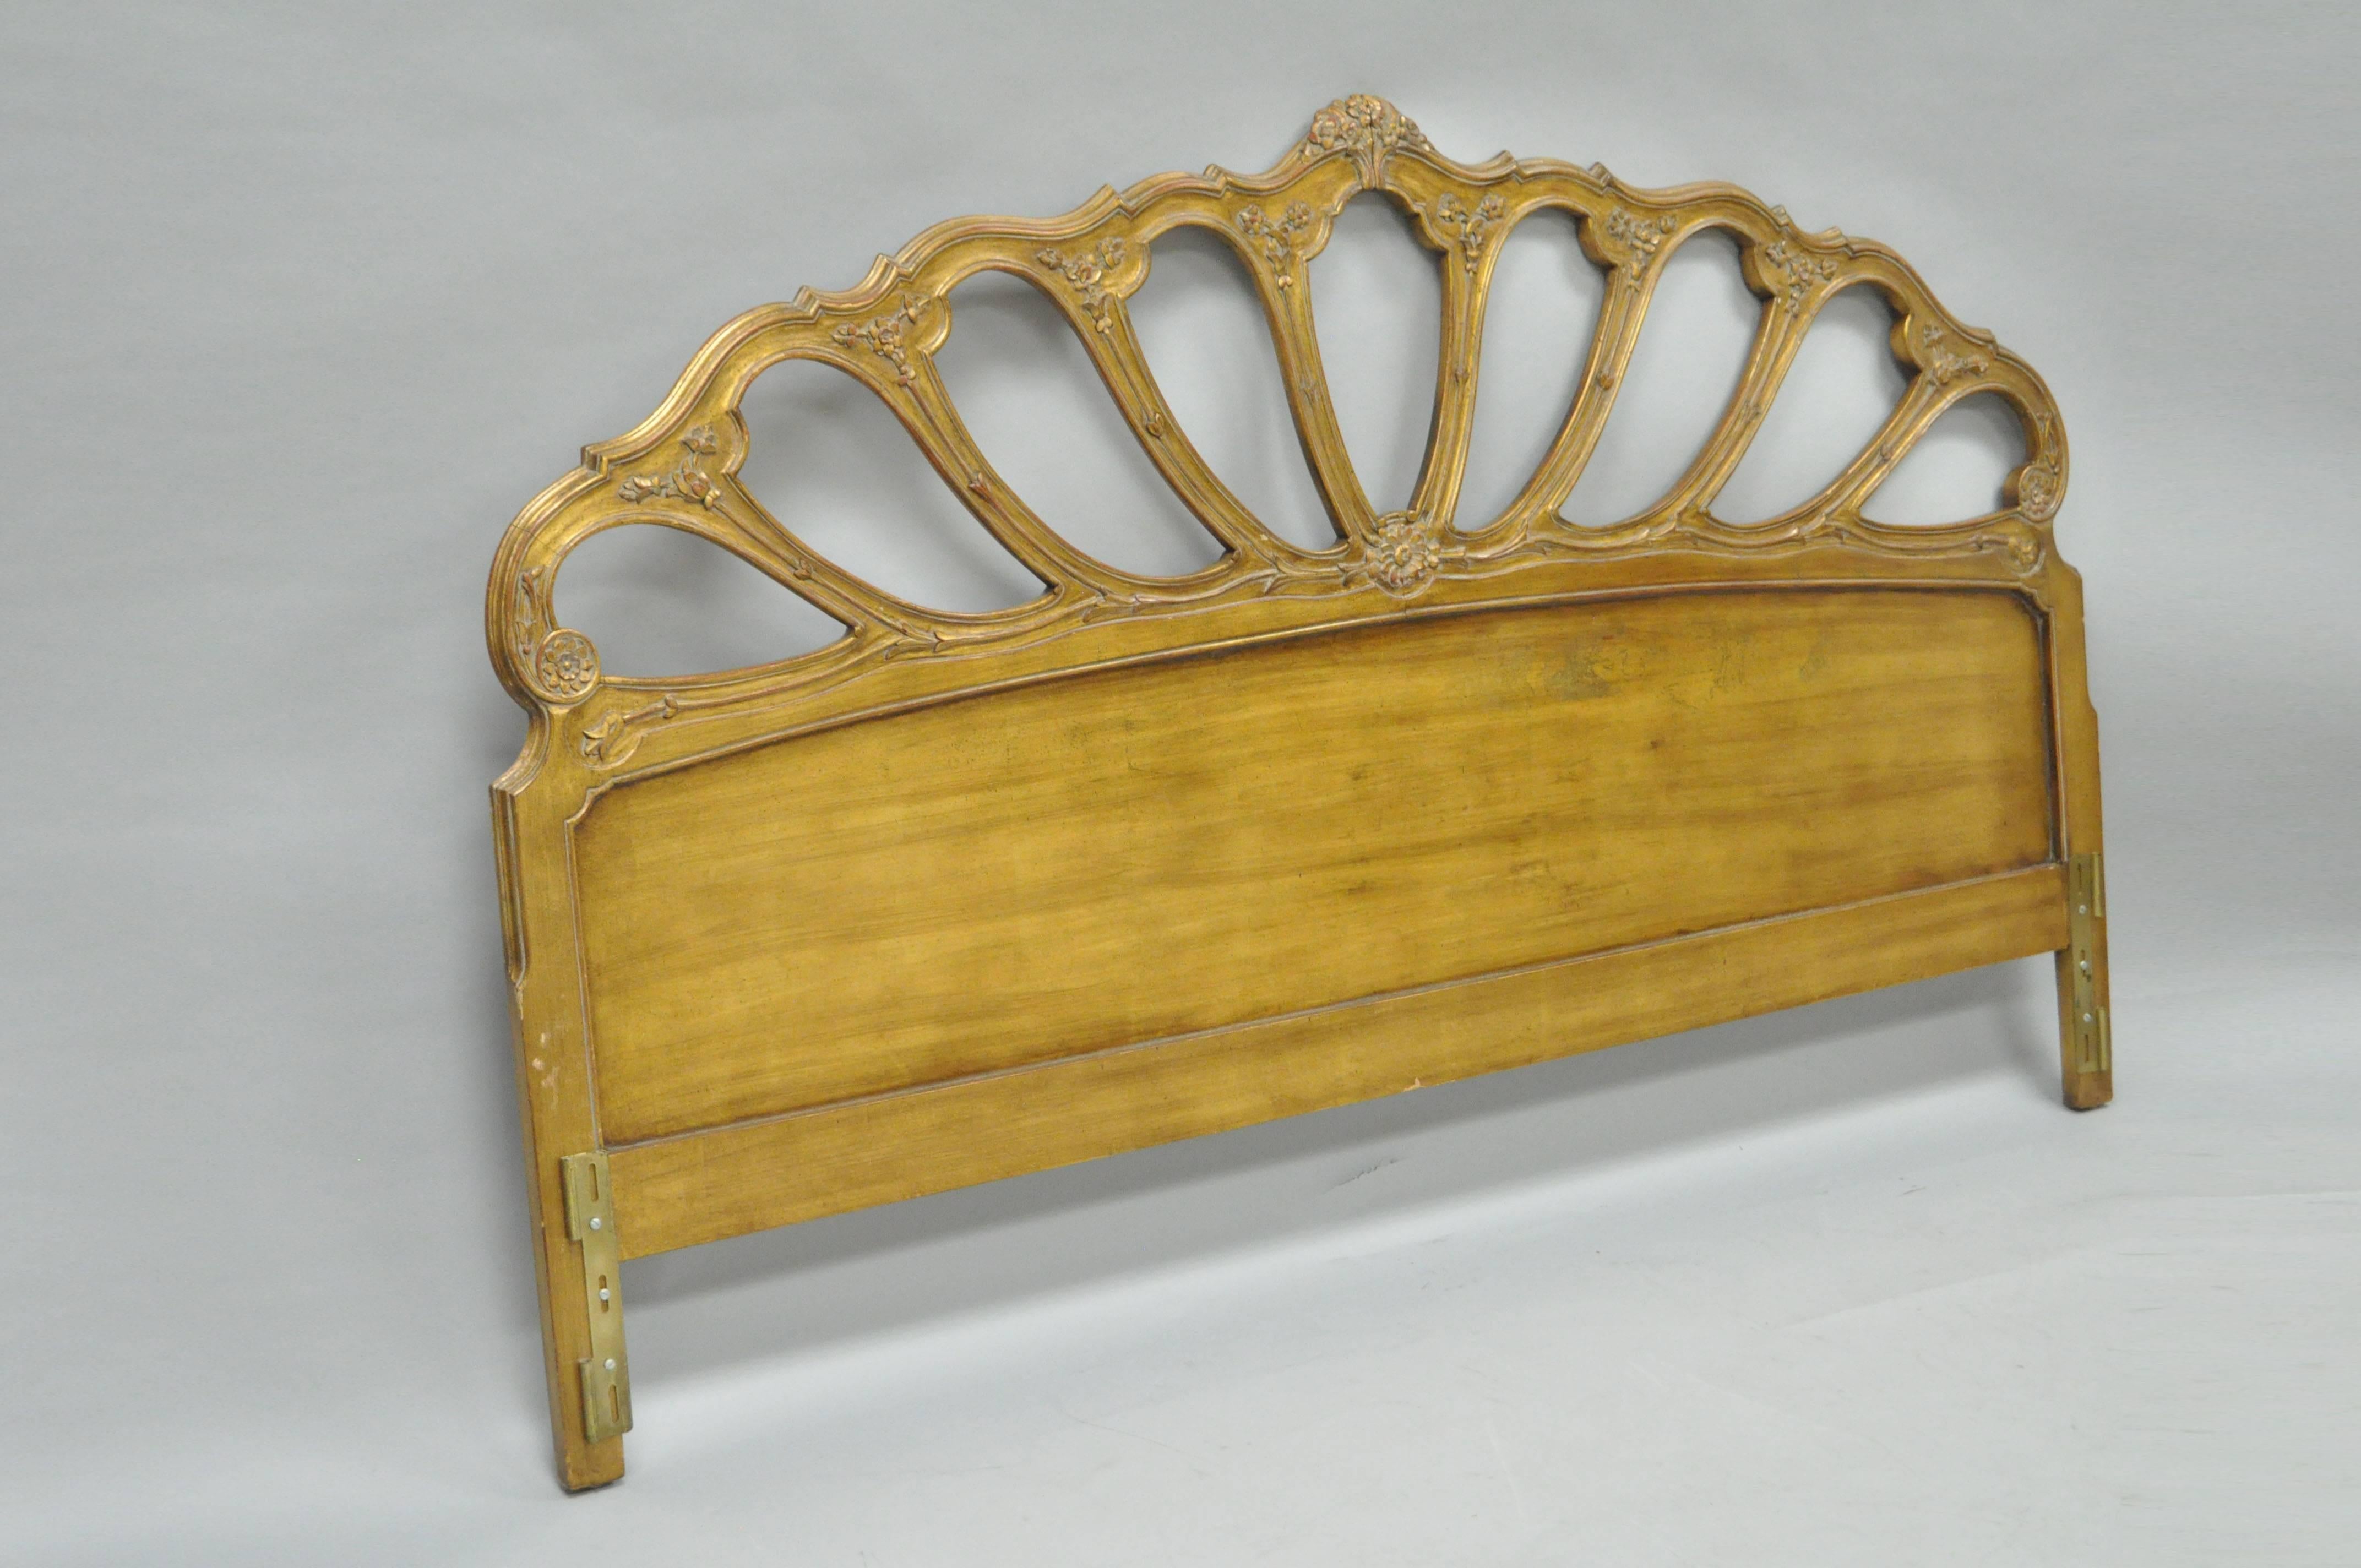 Vintage Italian gold leaf giltwood king-size headboard. Item features a solid open carved wood frame, gold leaf finish, floral detailing, and attractive form.